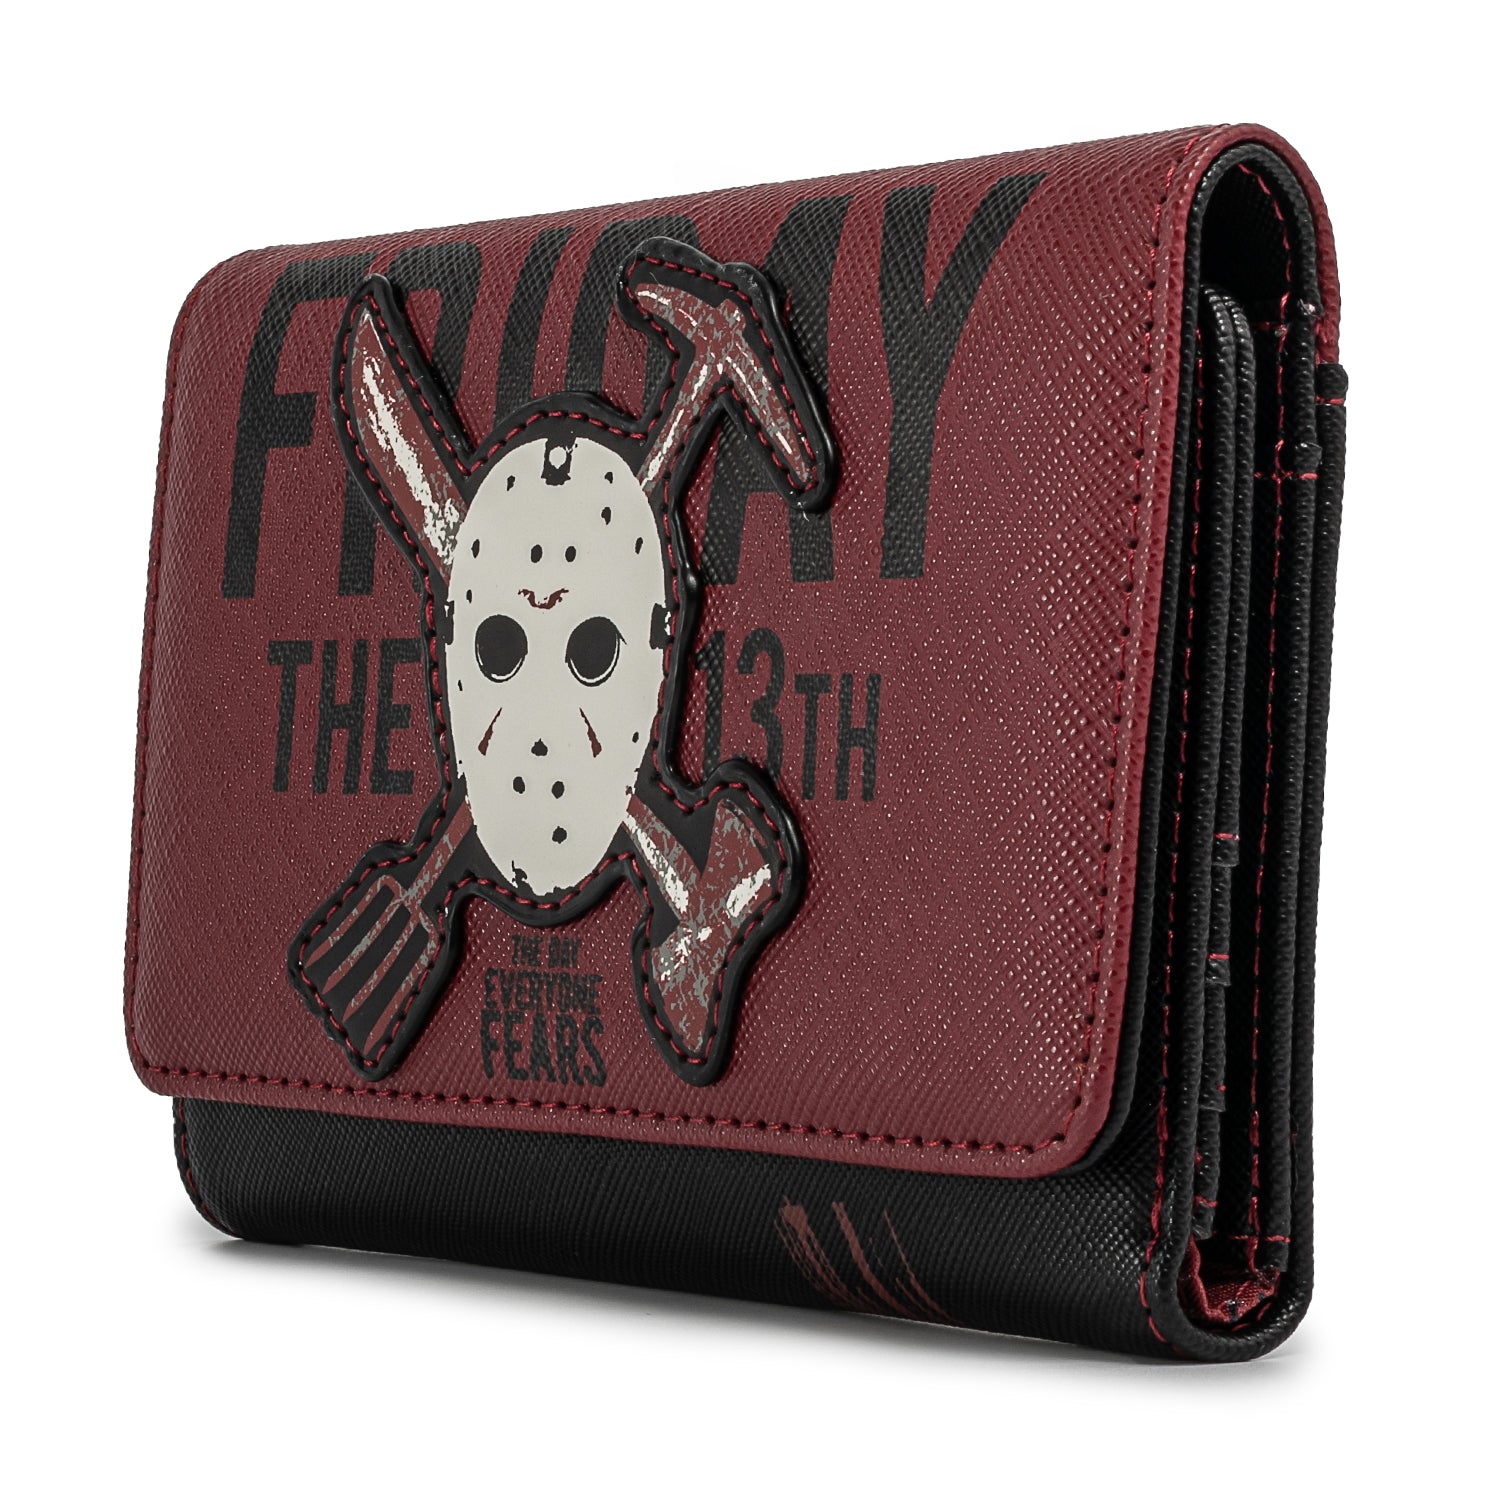 Friday The 13th | Jason Mask Trifold Wallet